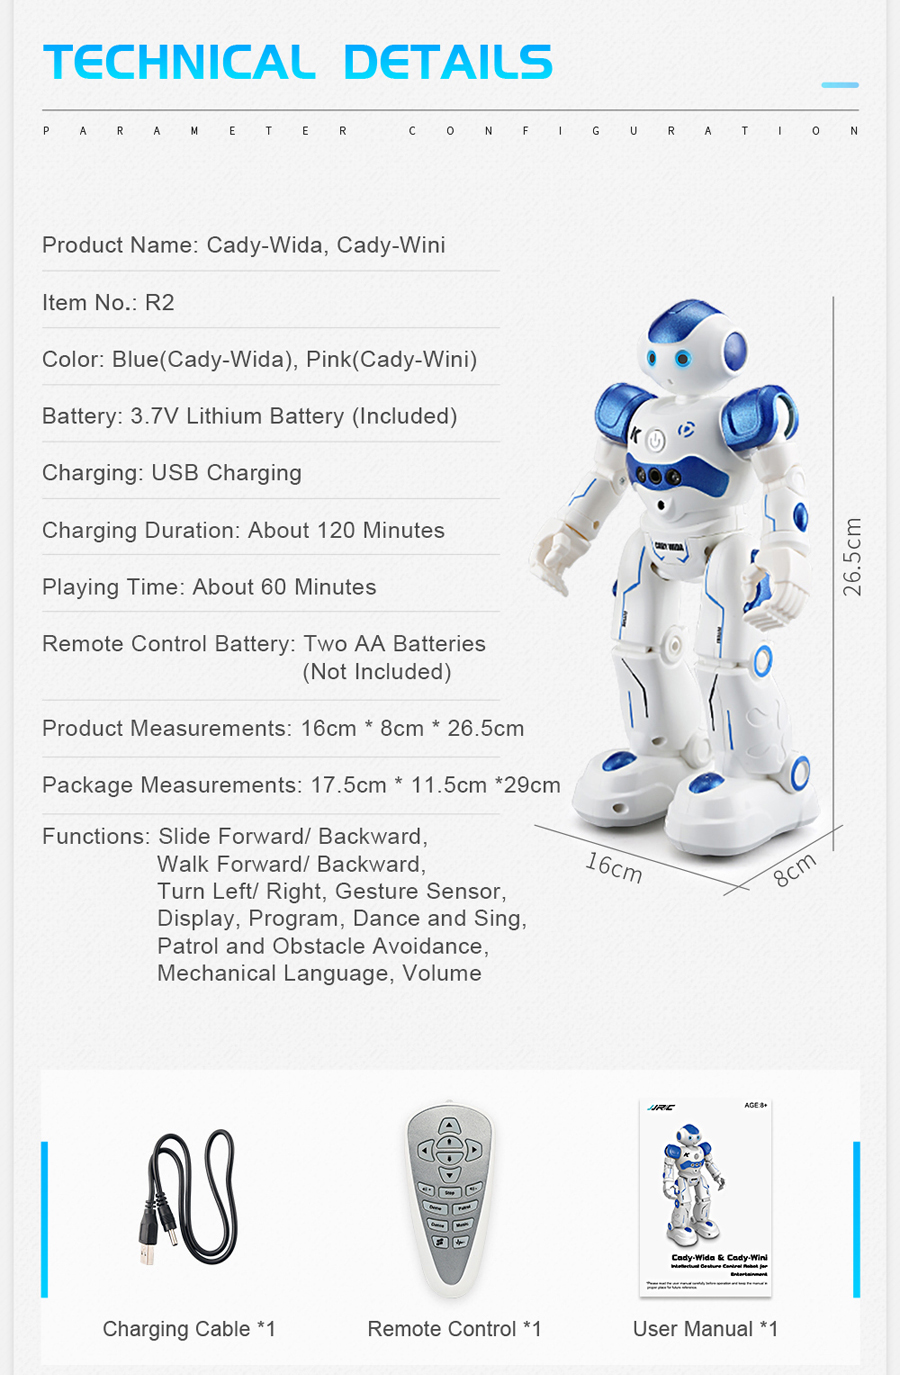 JJRC R2 Cady USB Charging Dancing Gesture Control Robot Toy 20